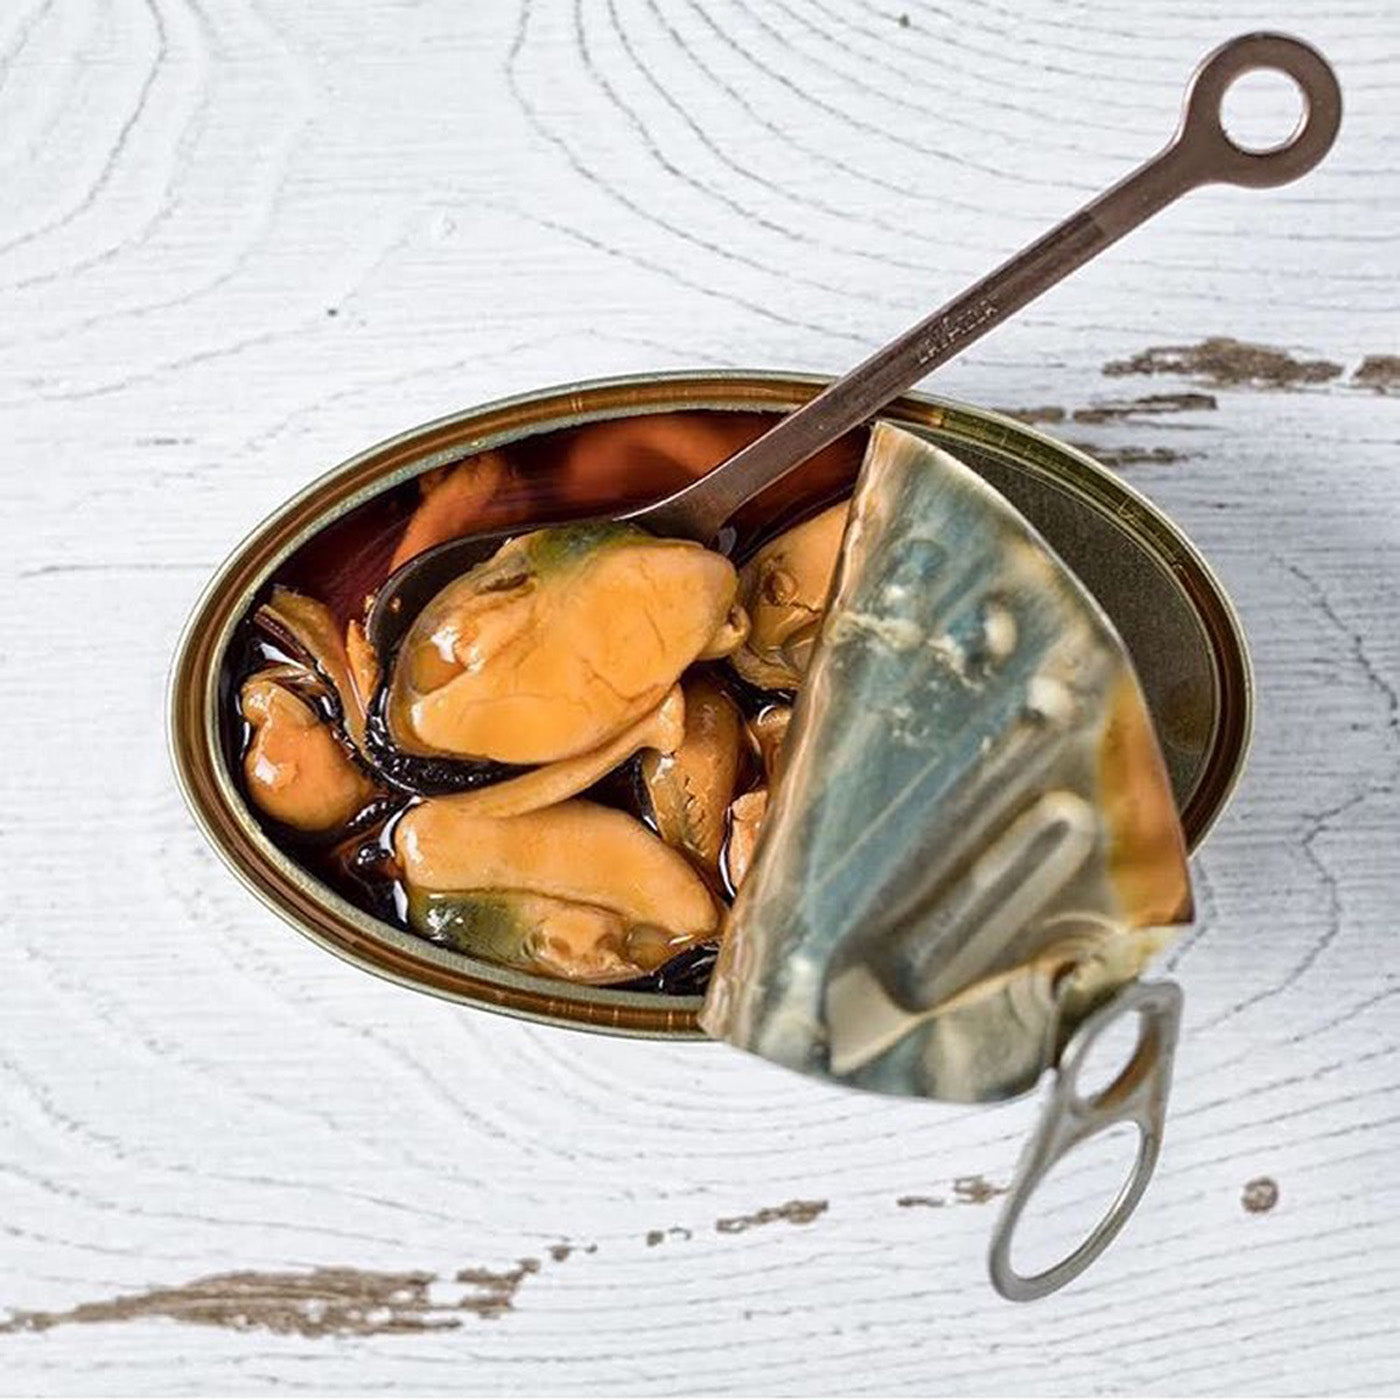 Mussels in Escabeche - photo by Cafe Gala